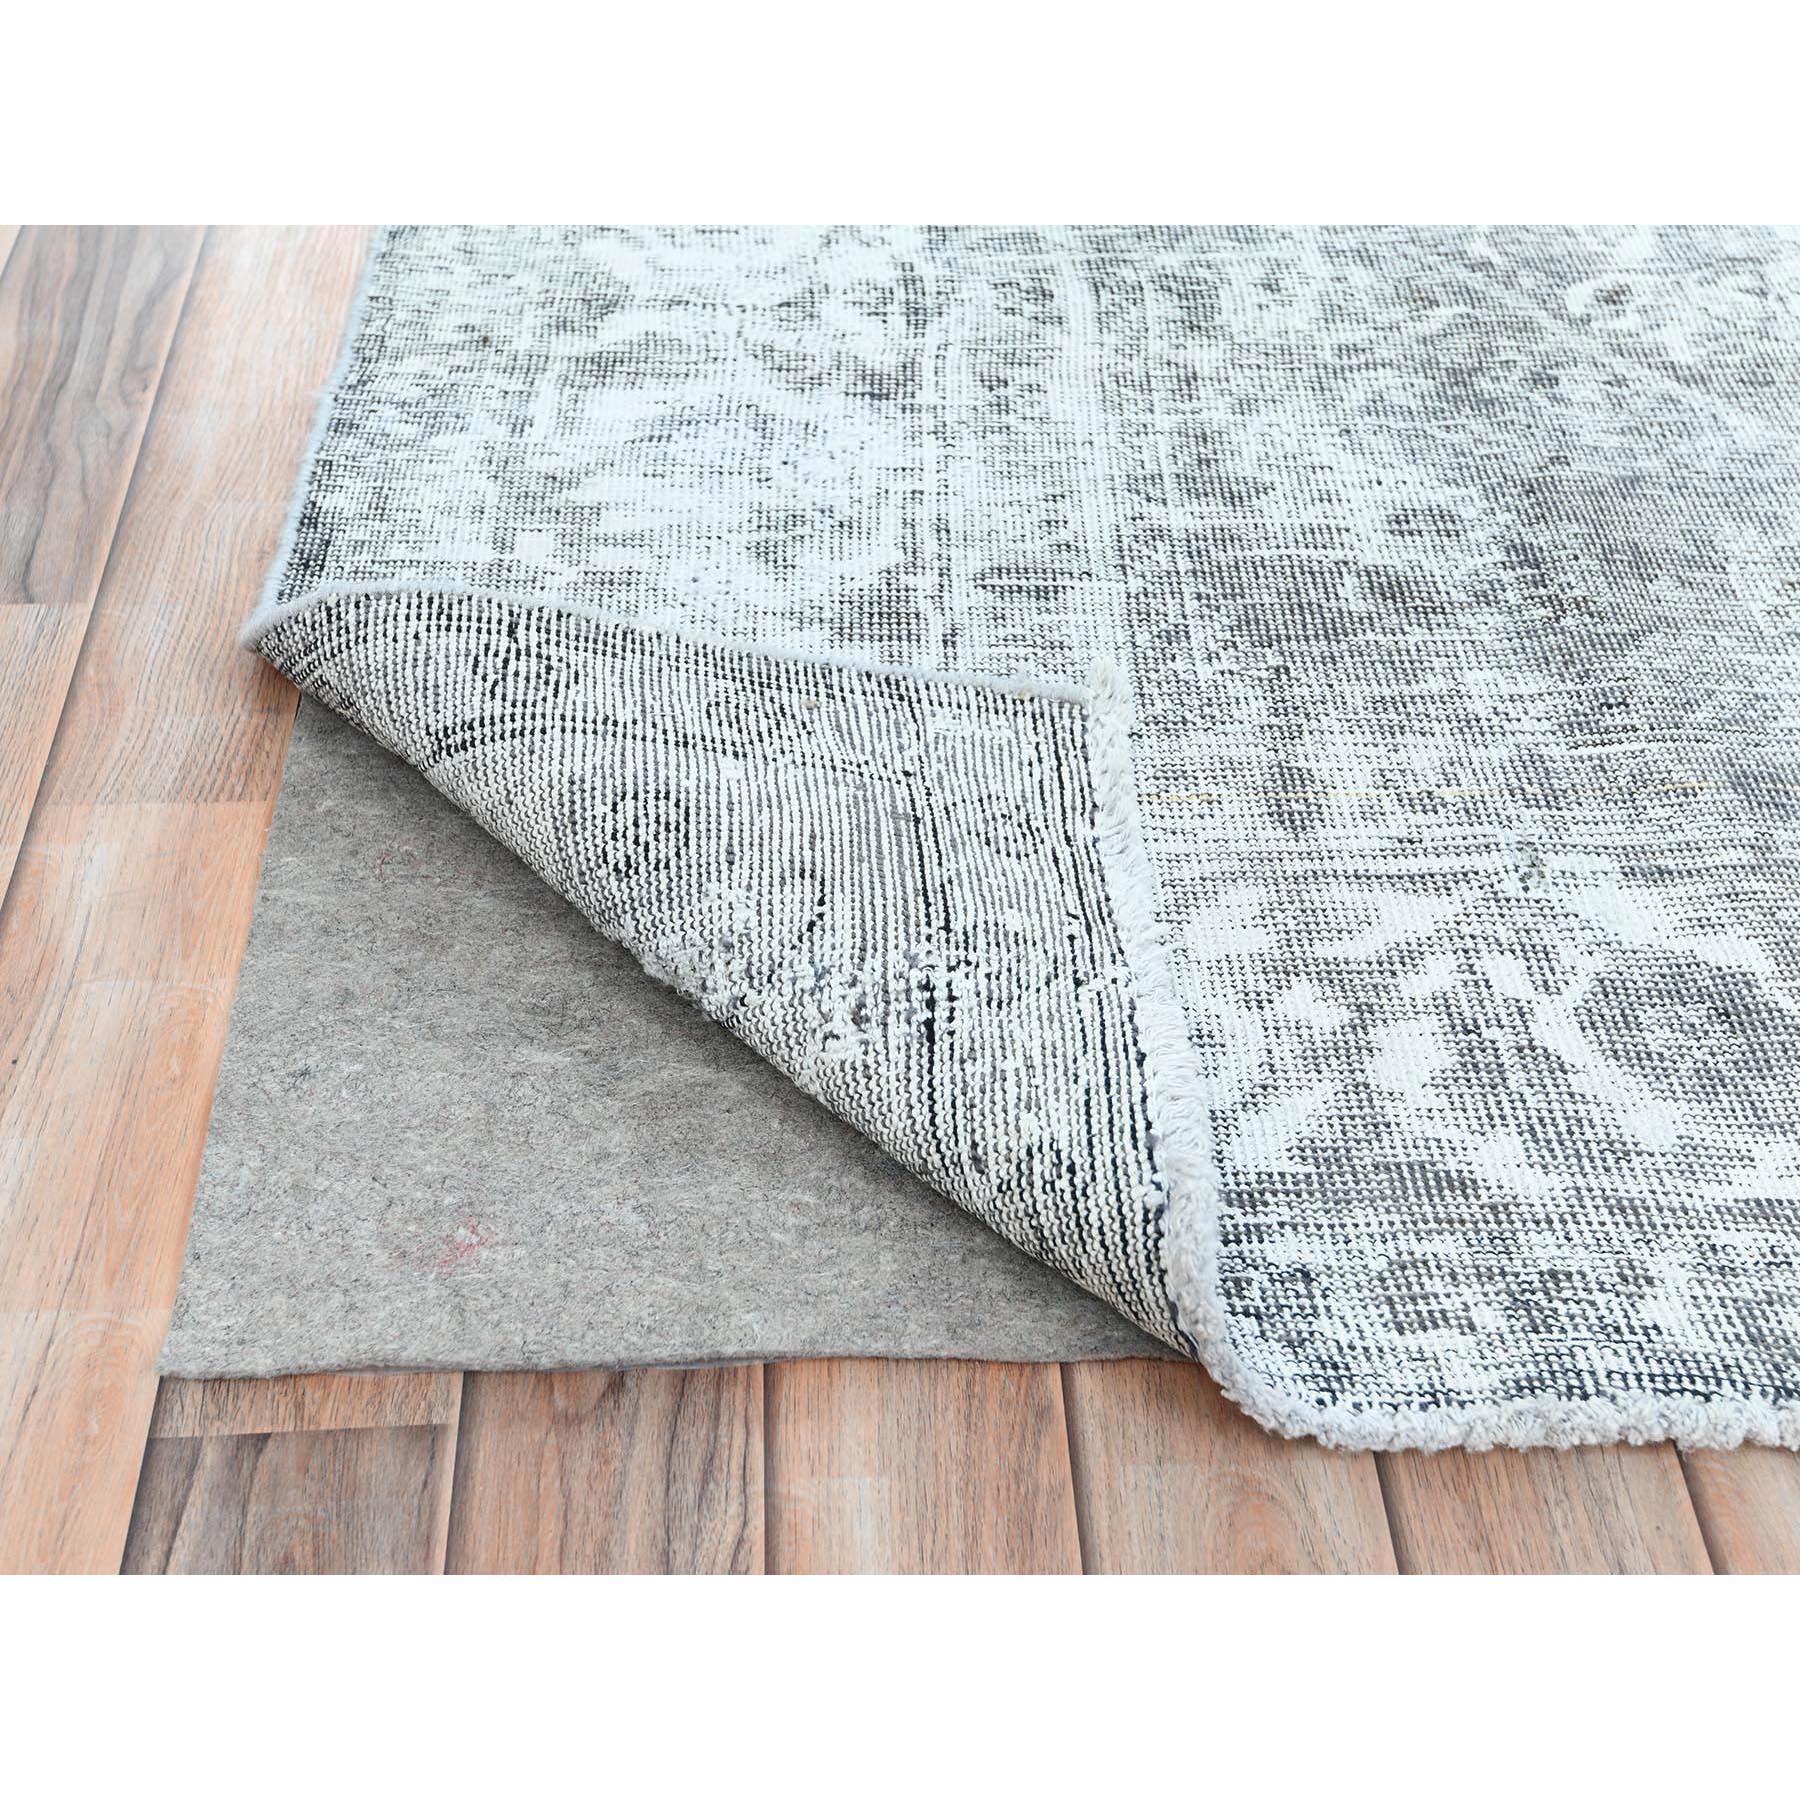 Light Grey Vintage Persian Tabriz Worn Down Rustic Feel Wool Hand Knotted Rug In Good Condition For Sale In Carlstadt, NJ